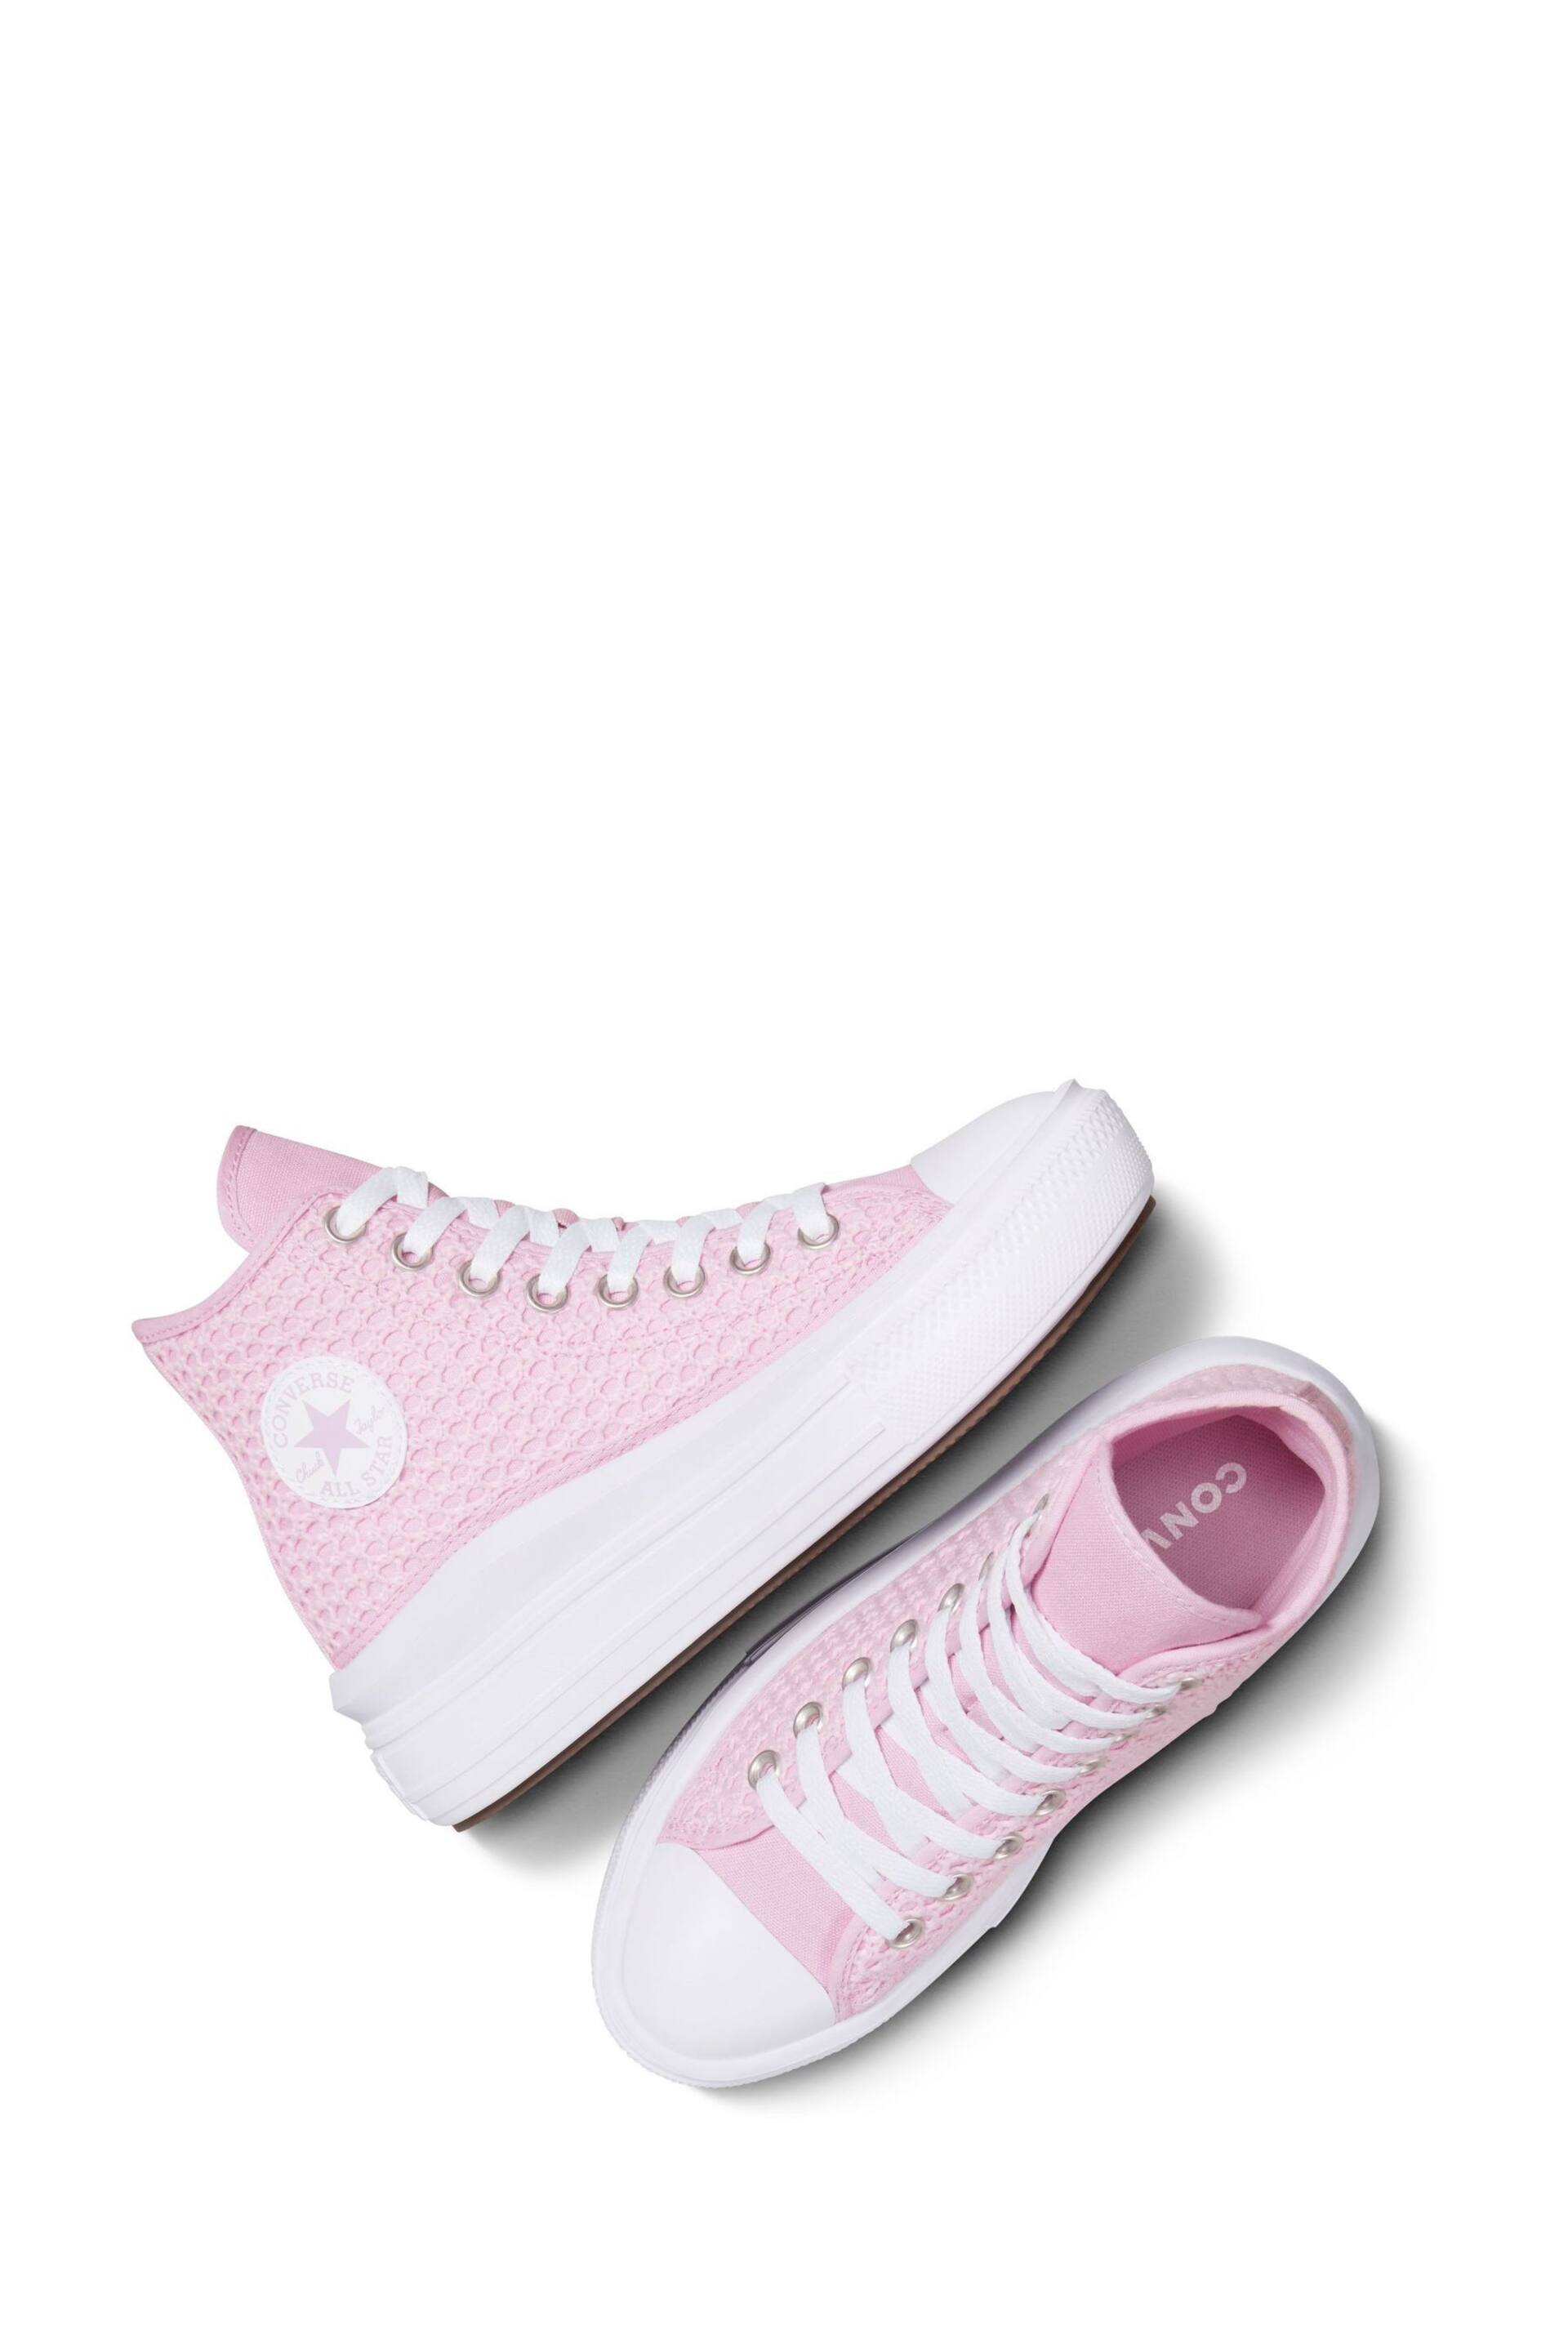 Converse Pink Chuck Taylor Crochet Move Youth Trainers - Image 7 of 8